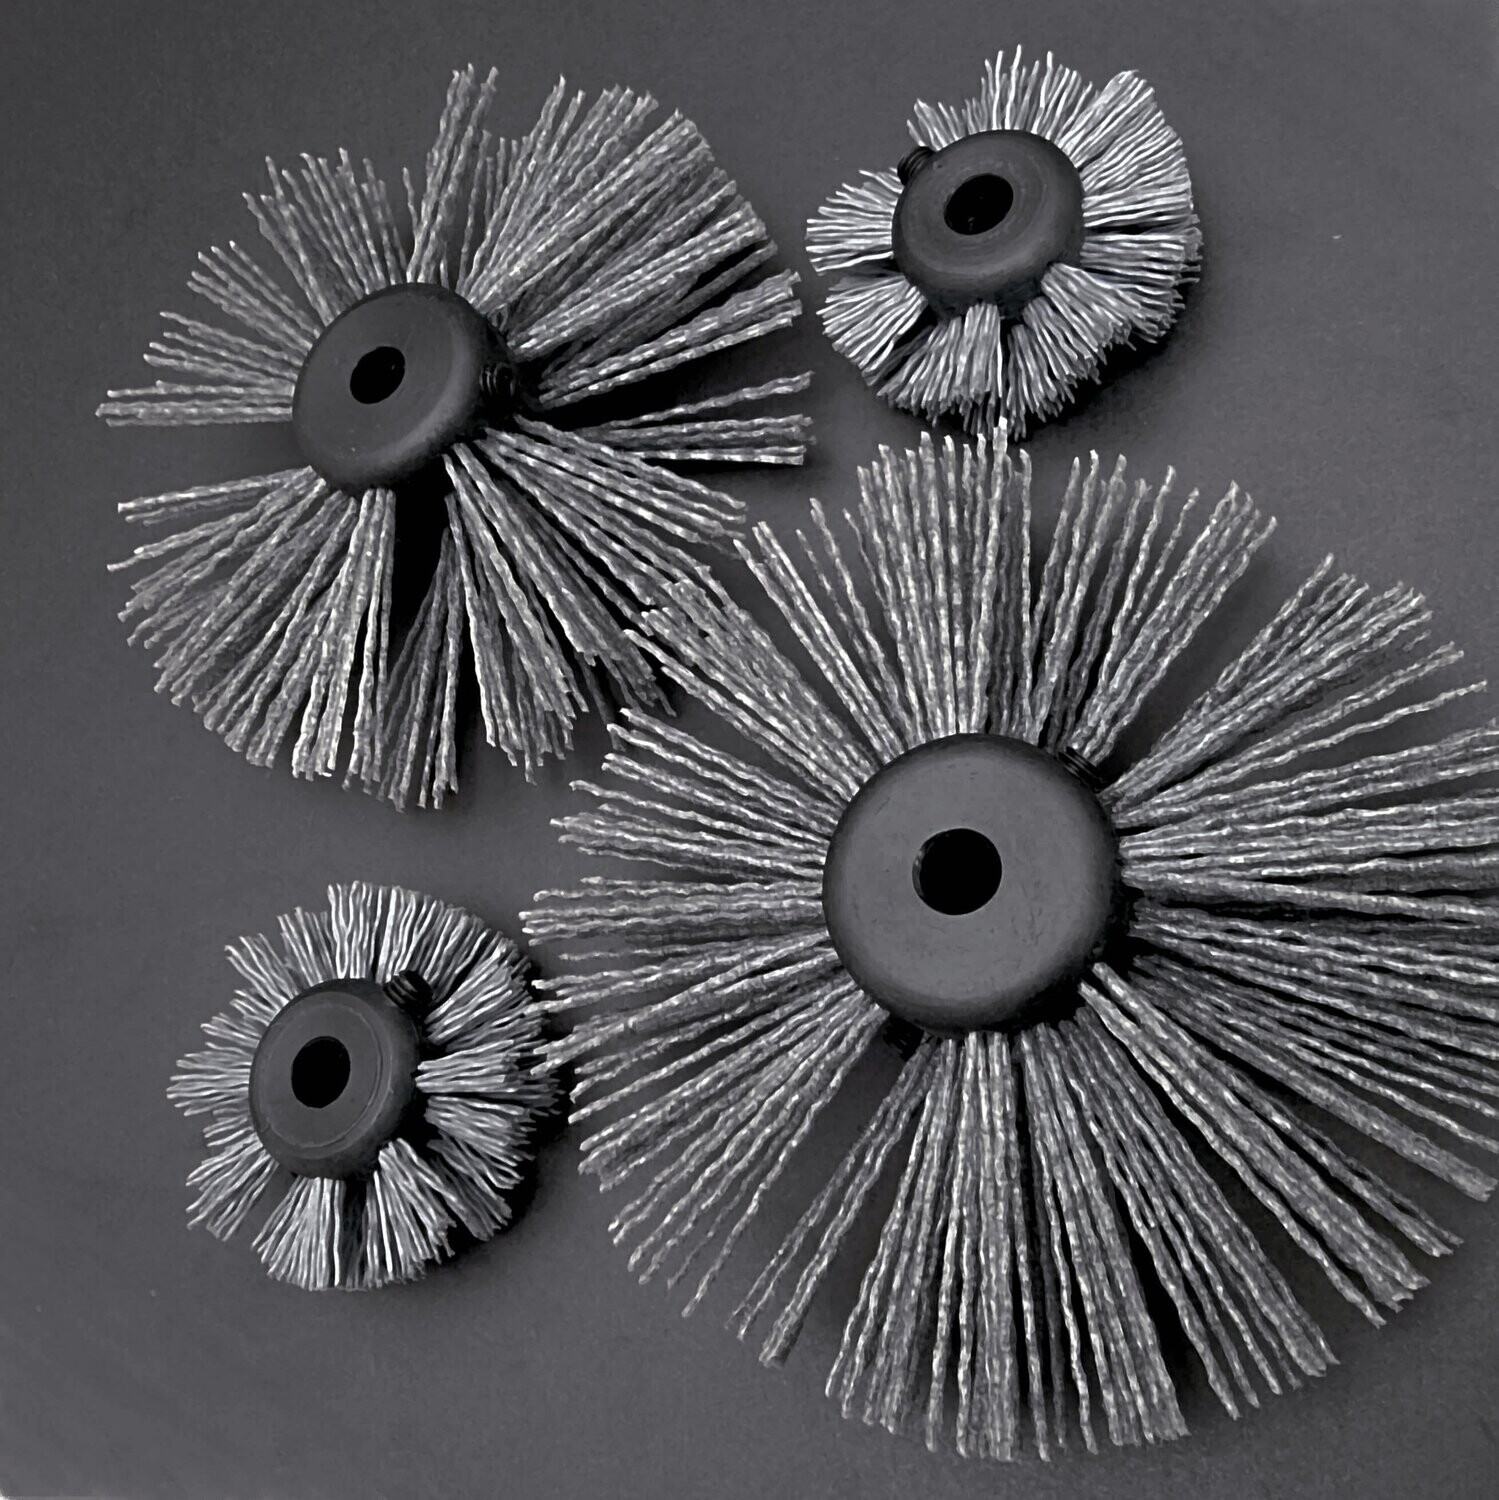 Carbide Brushes for pipe cleaning and pipe coating used with Ridgid flexshafts and Picote tools